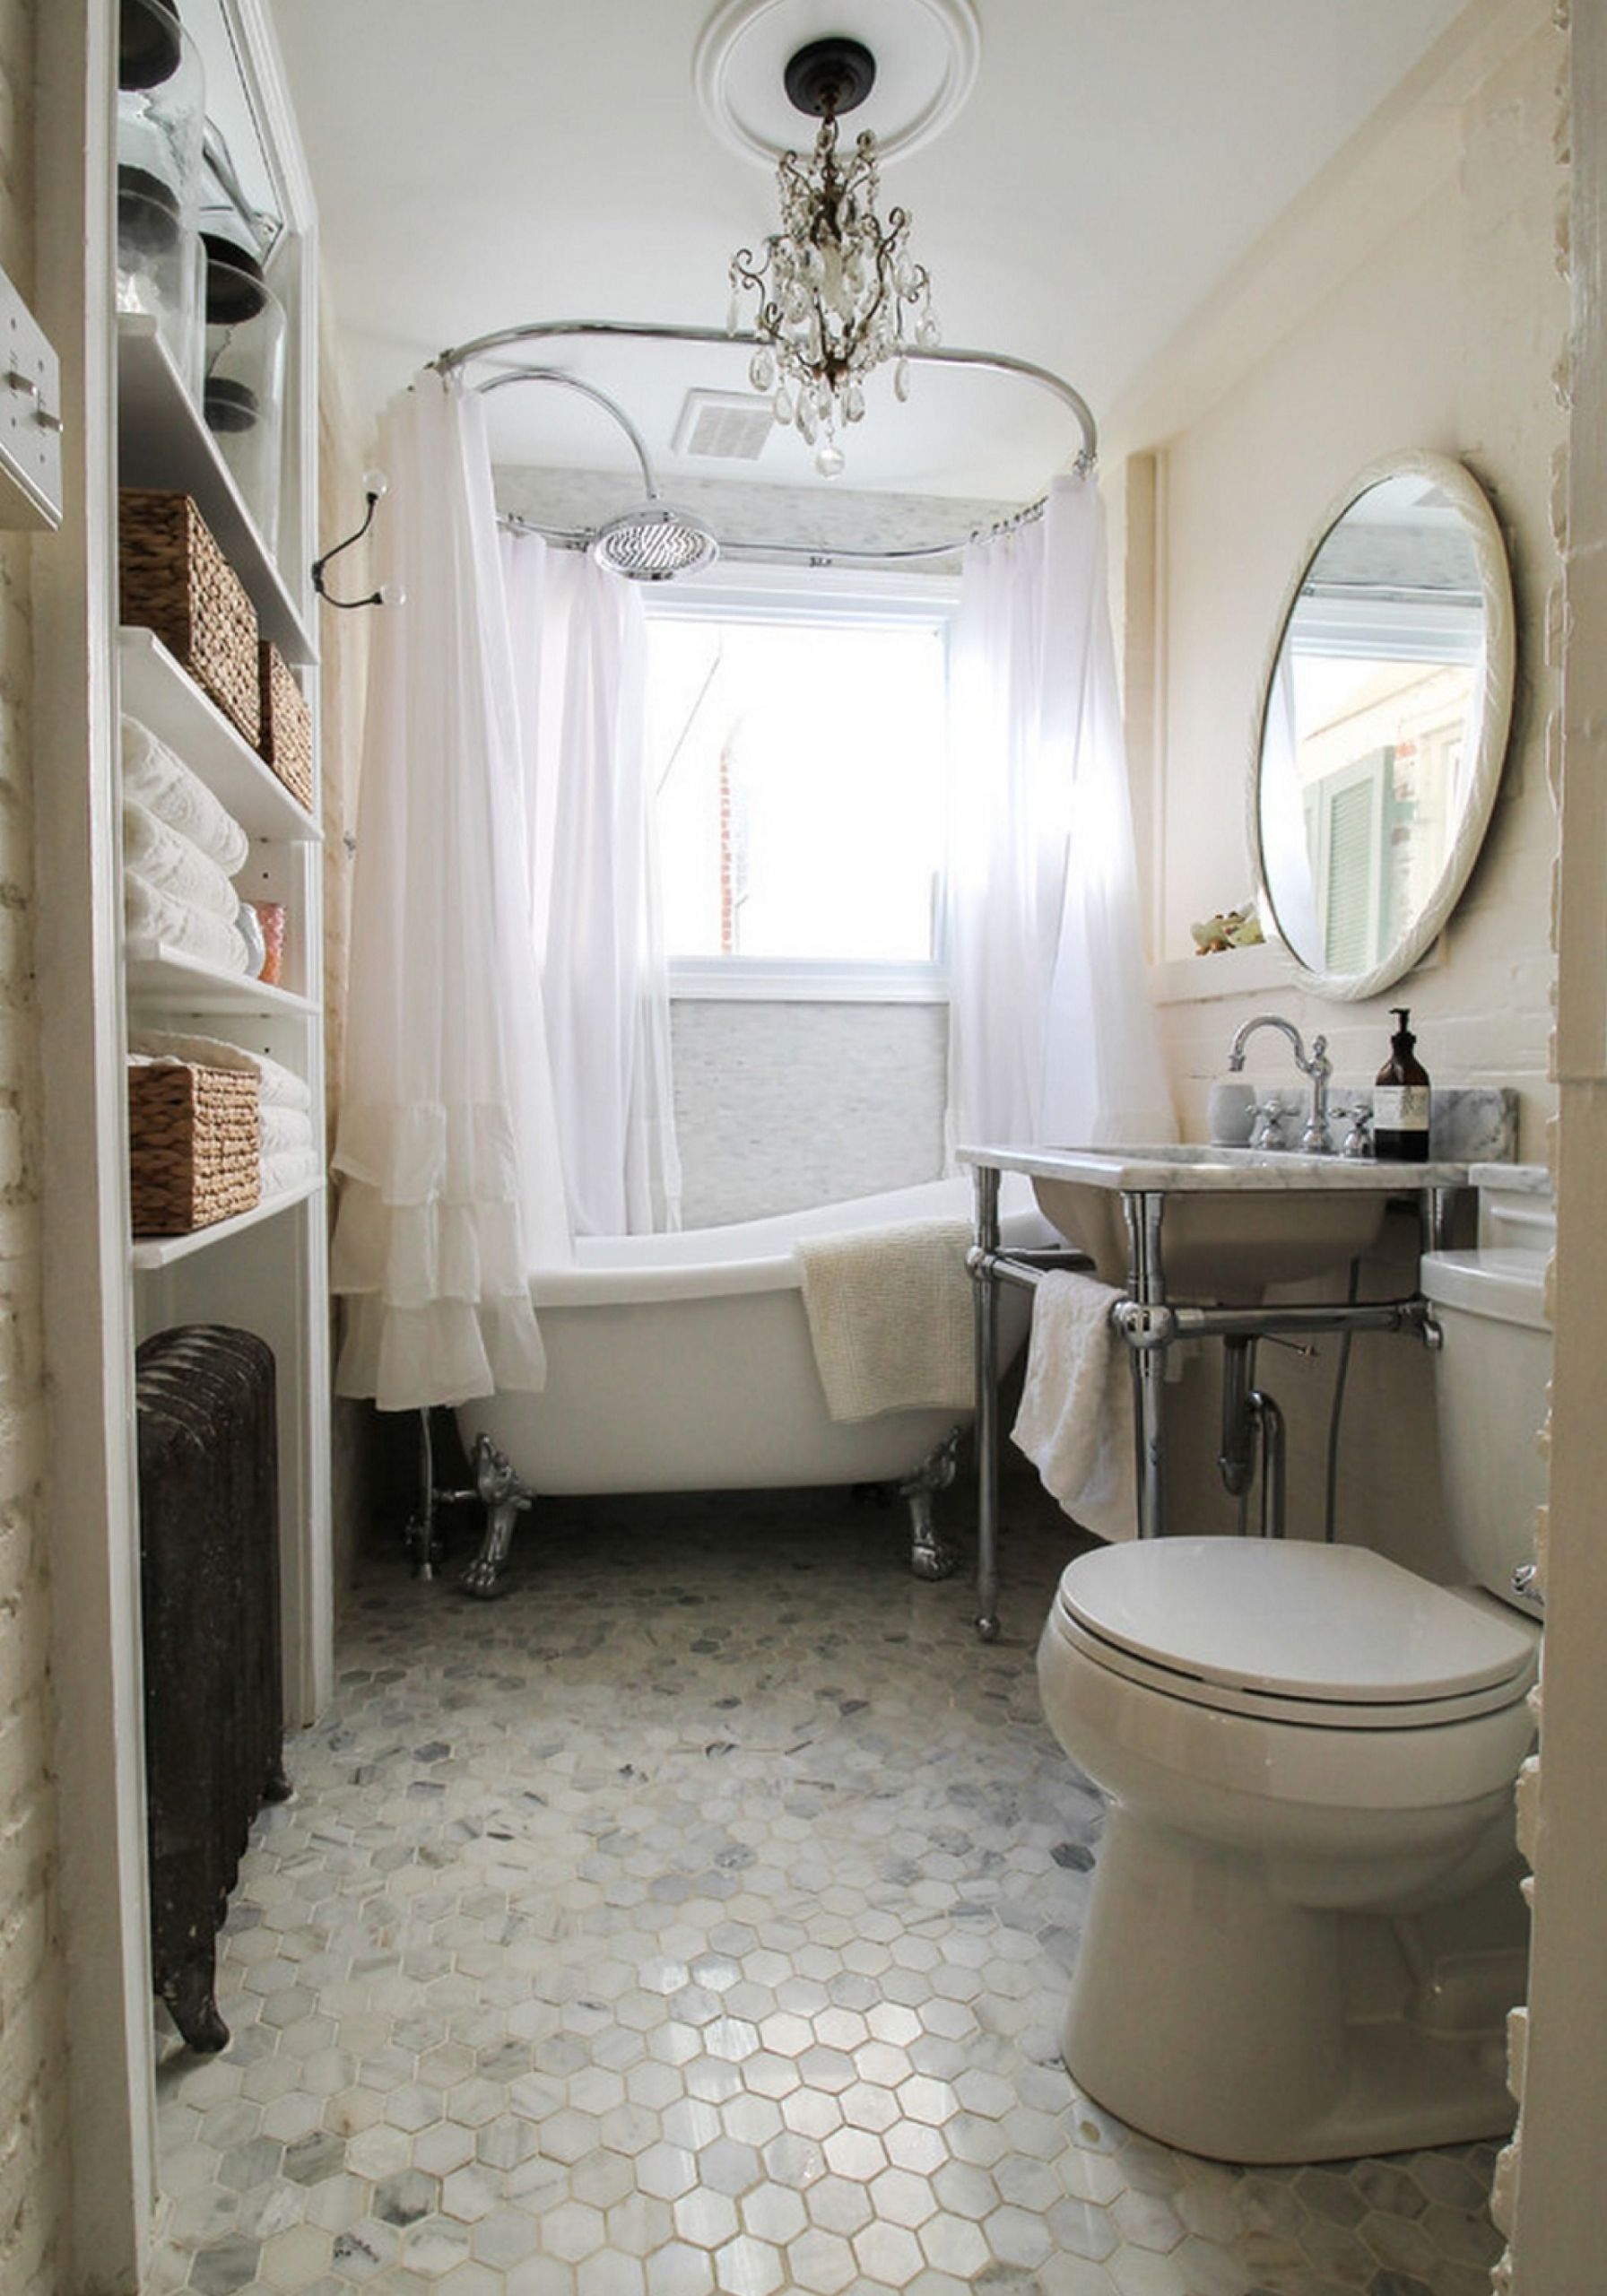 Small Vintage Bathroom Ideas
 Soft pastels and timeless neutrals fill this small vintage